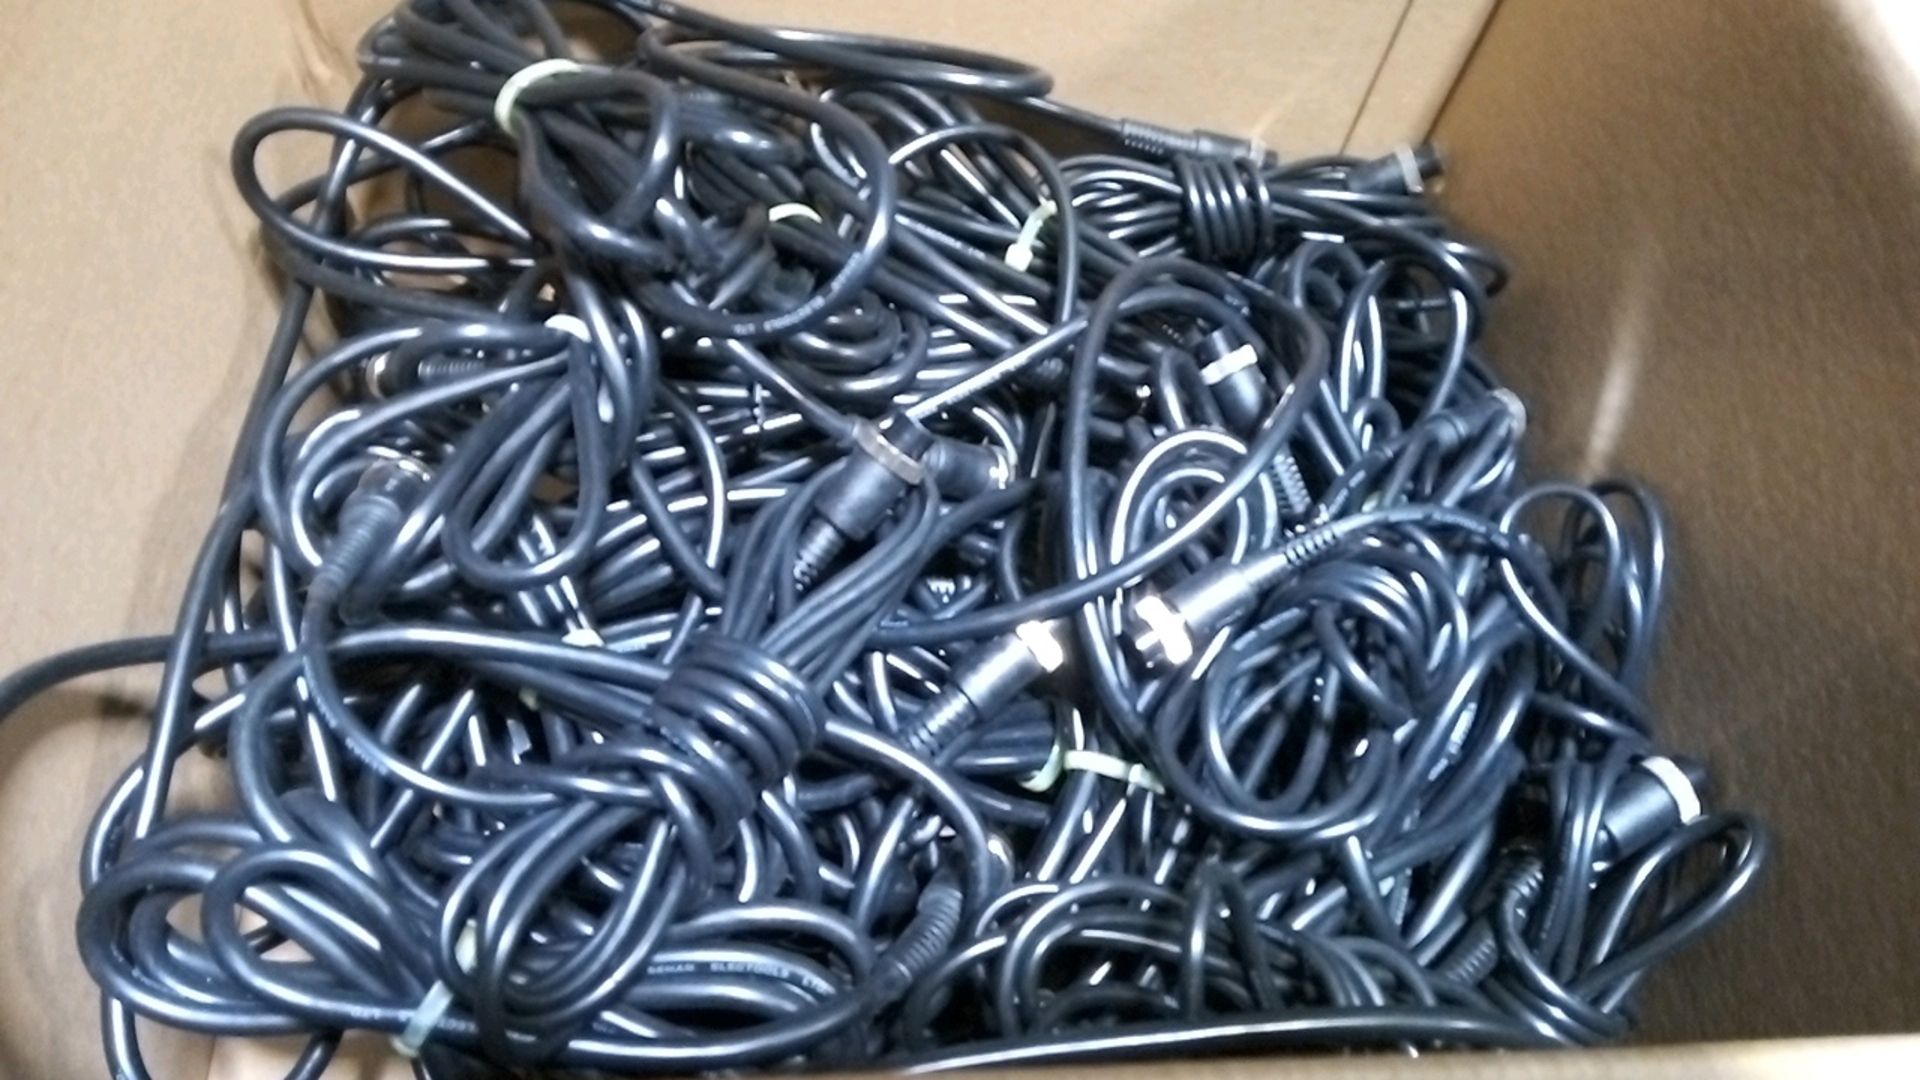 LOT OF SCREW DRIVER CONTROLLER CABLES